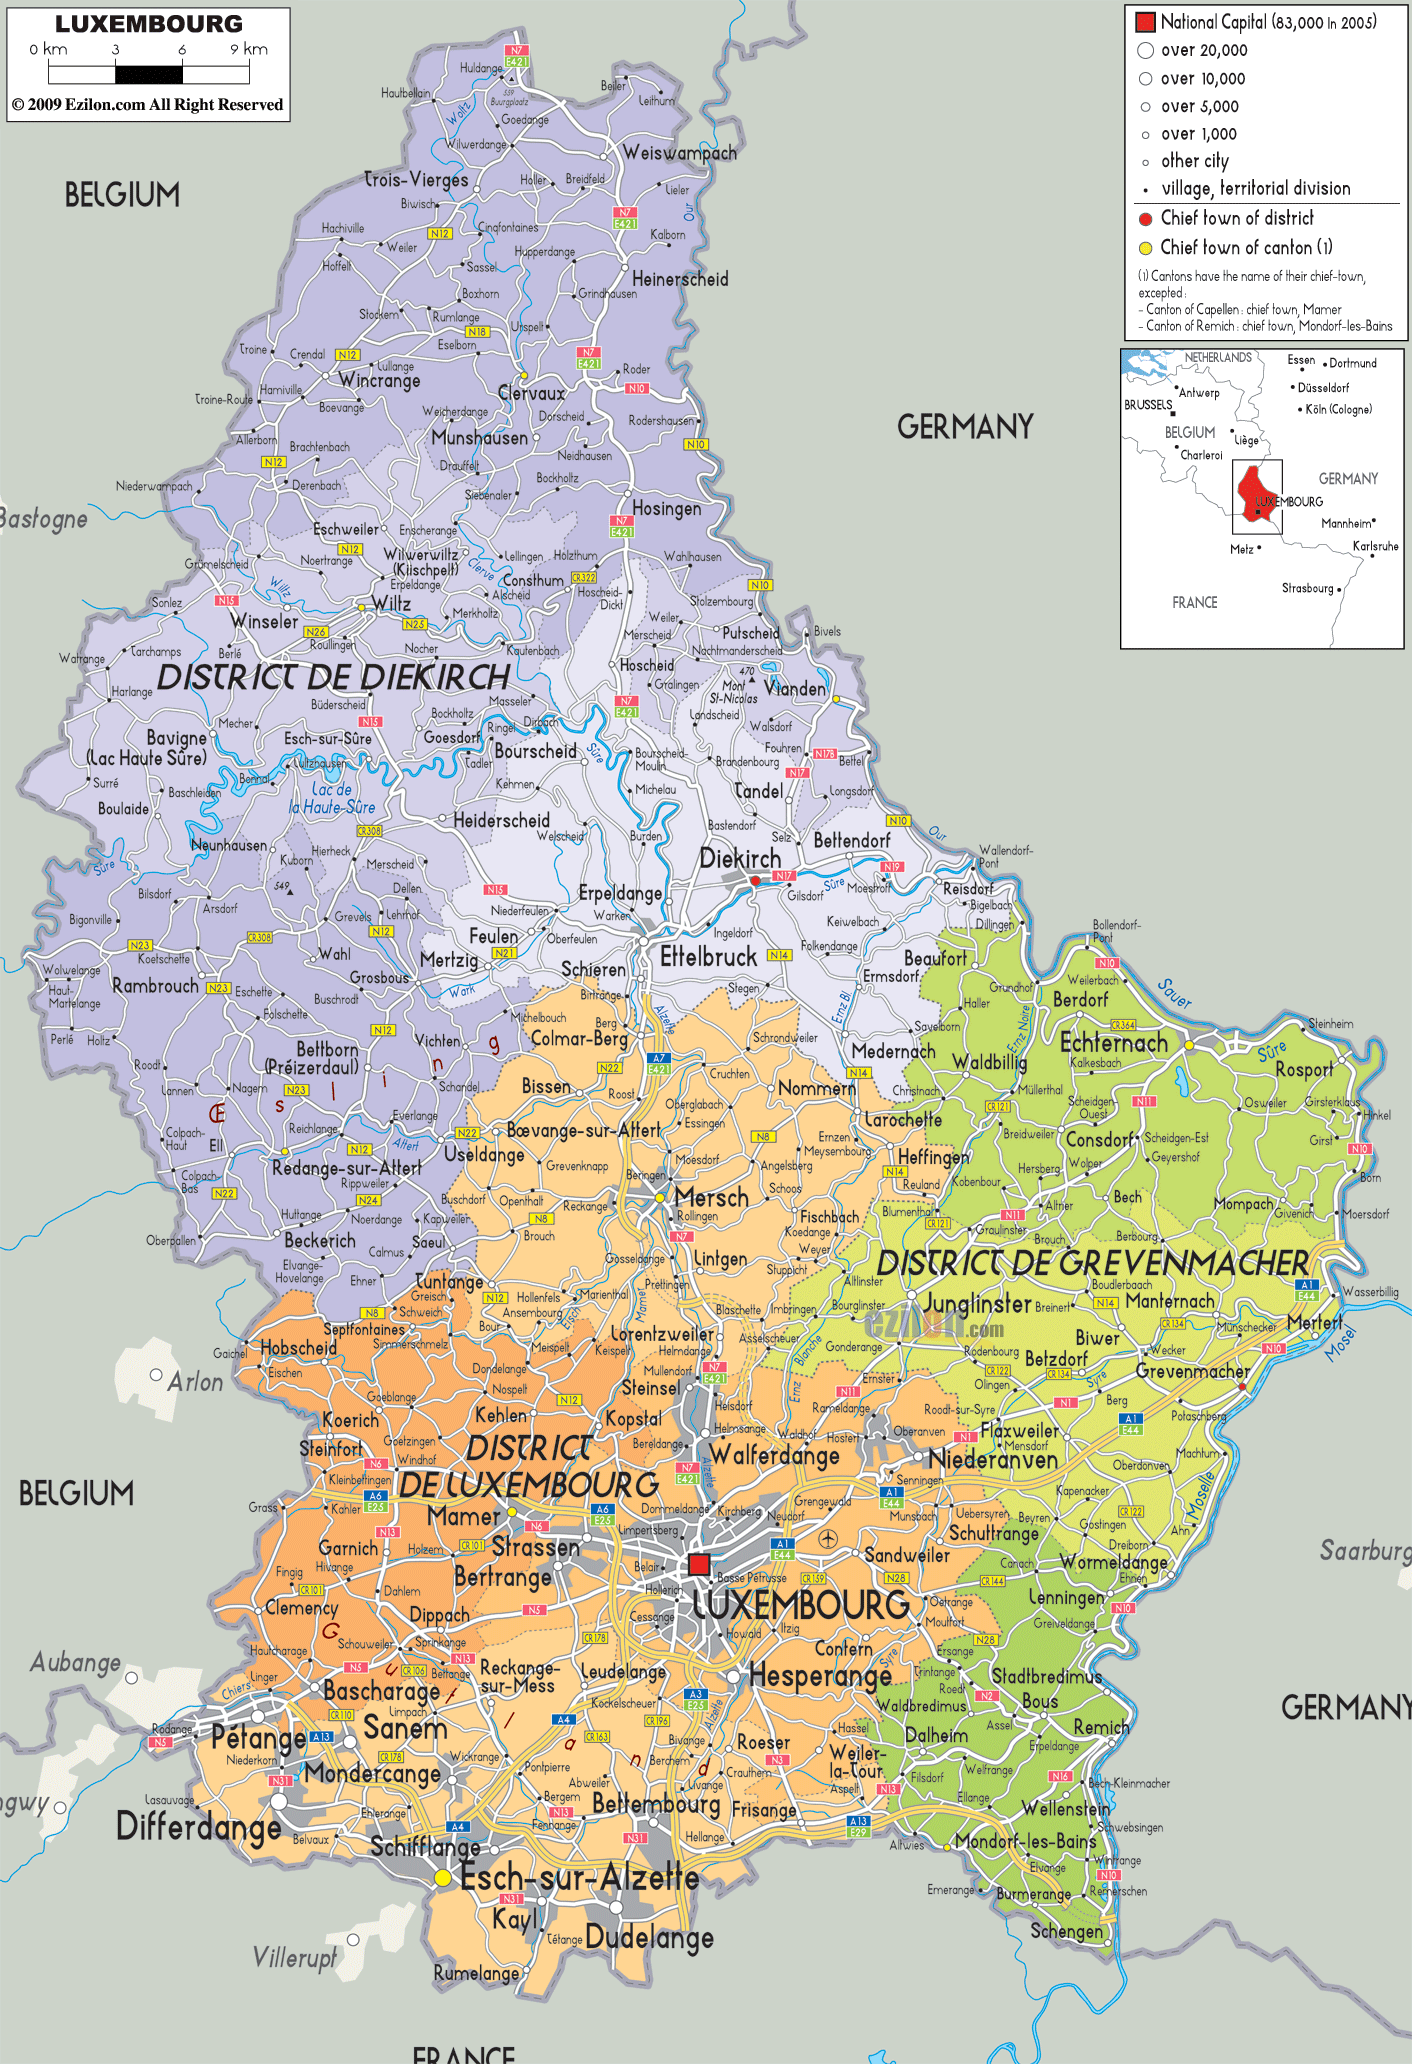 Luxembourg political map